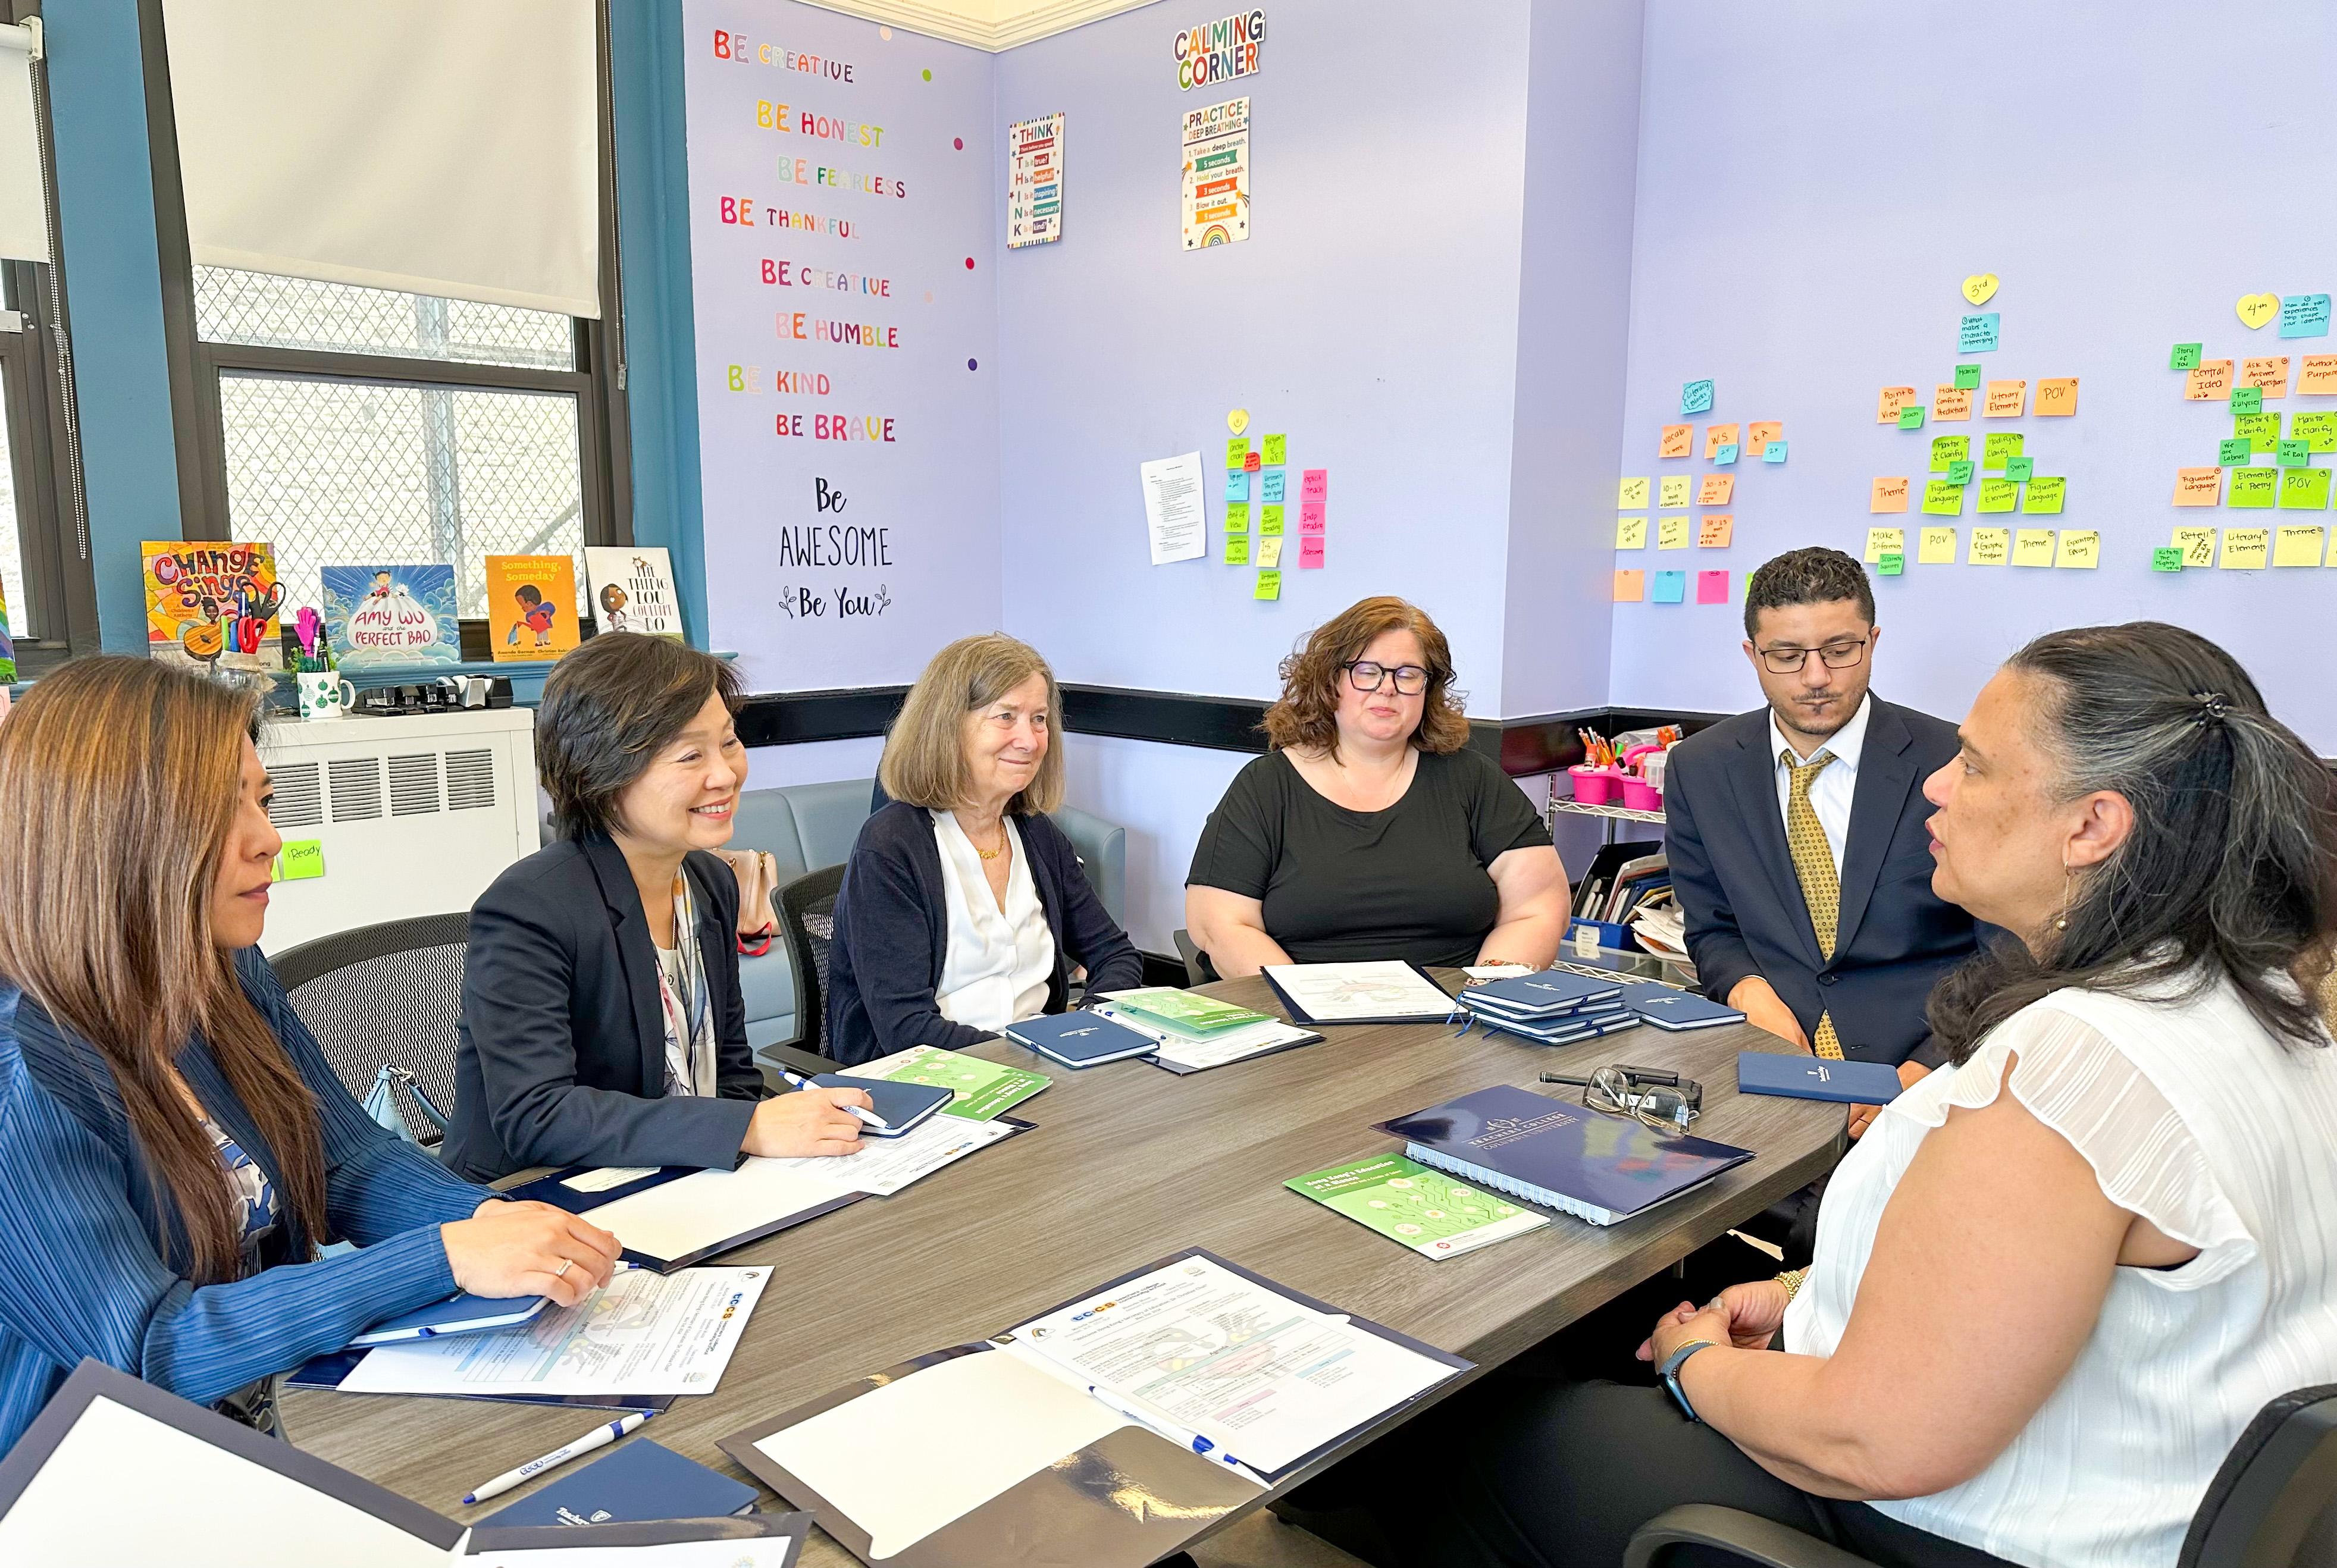 The Secretary for Education, Dr Choi Yuk-lin, visited Teachers College Community School in New York, the United States, on May 31 (New York time). Photo shows Dr Choi (second left) meeting the principal of the school, Ms Michelle Verdiner (first right).